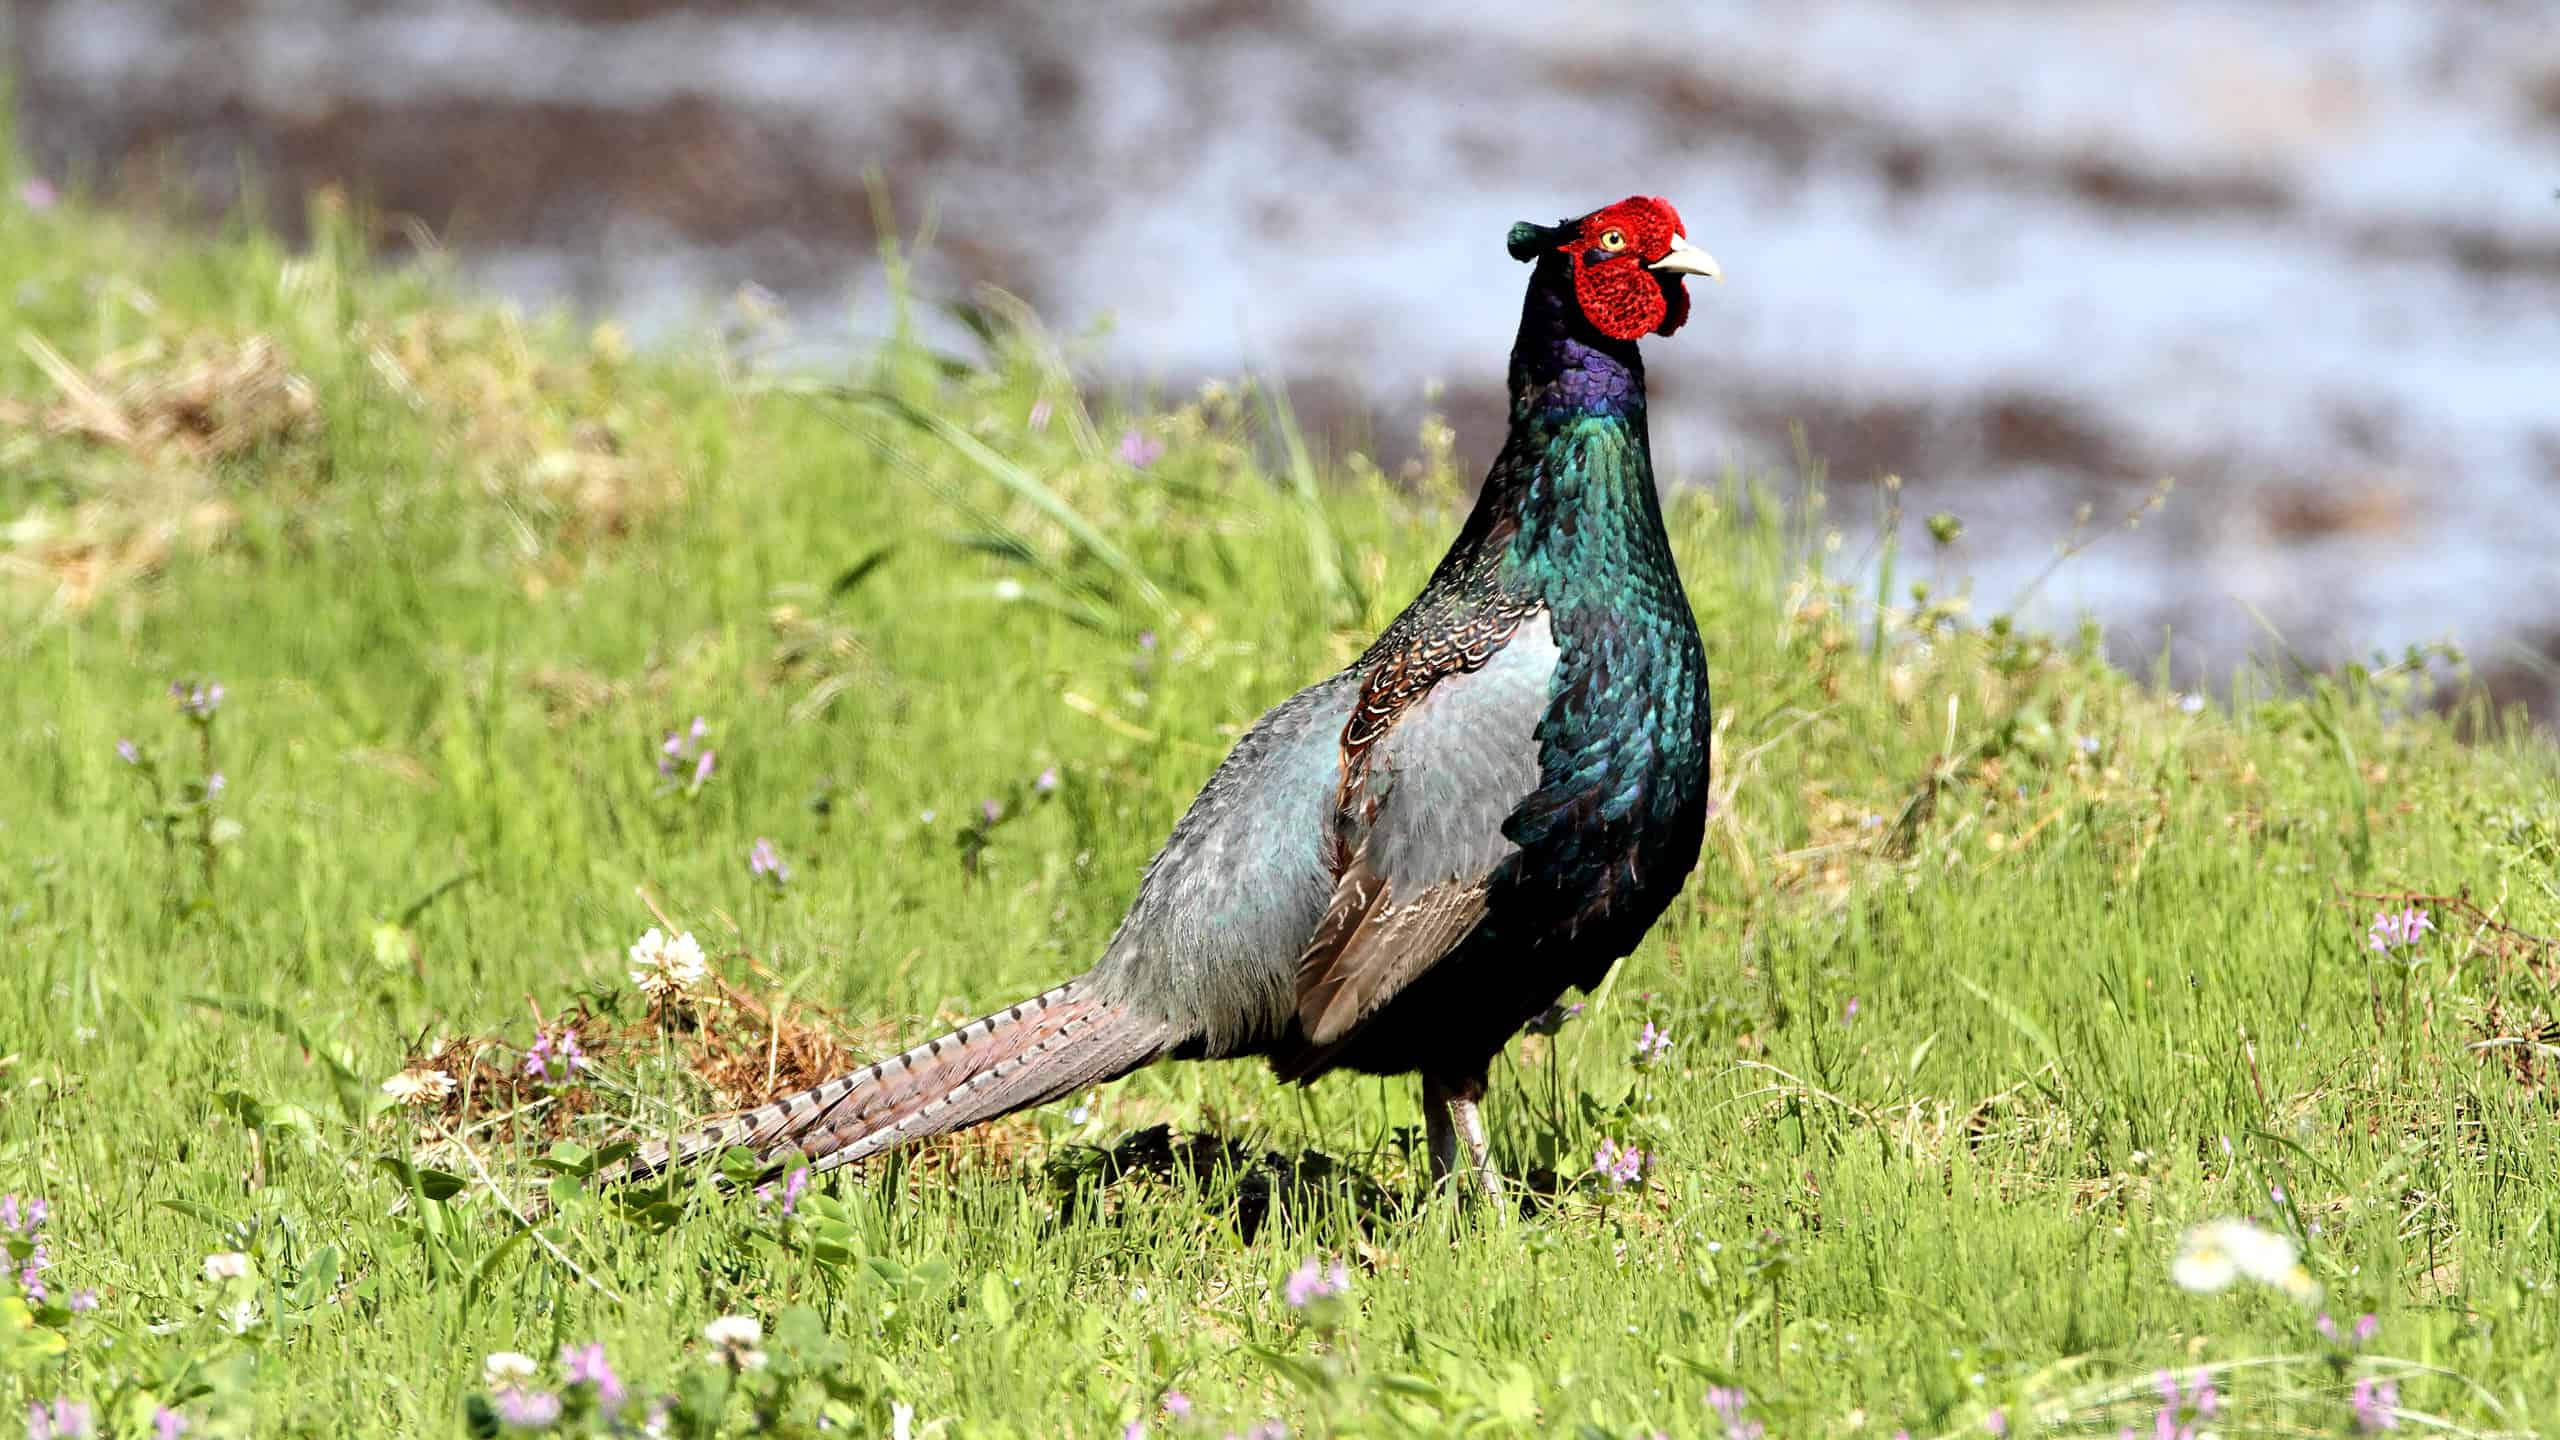 Green Pheasant in a Field - National Bird of Japan